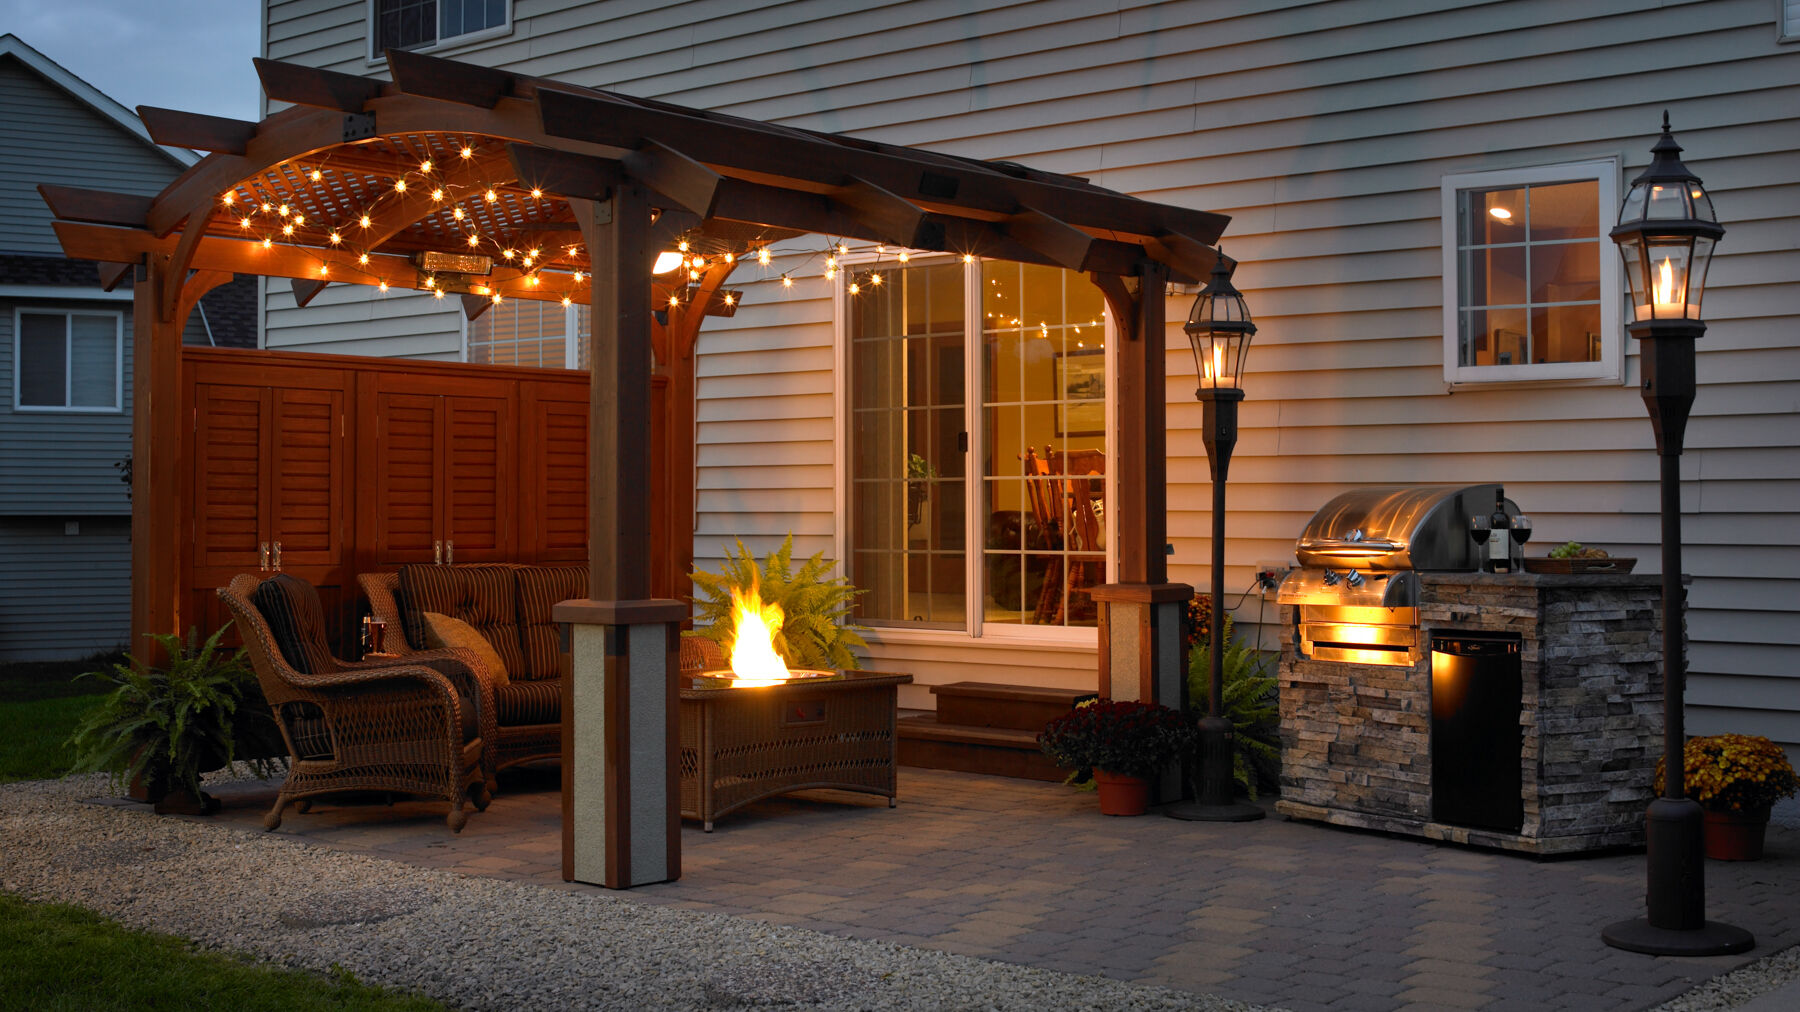 An outdoor patio space under a gazebo at night with fairy lights in the rafters, wicker lounge furniture, a gas fire pit table, a small kitchen island with a gas grill, and gas tiki torches.